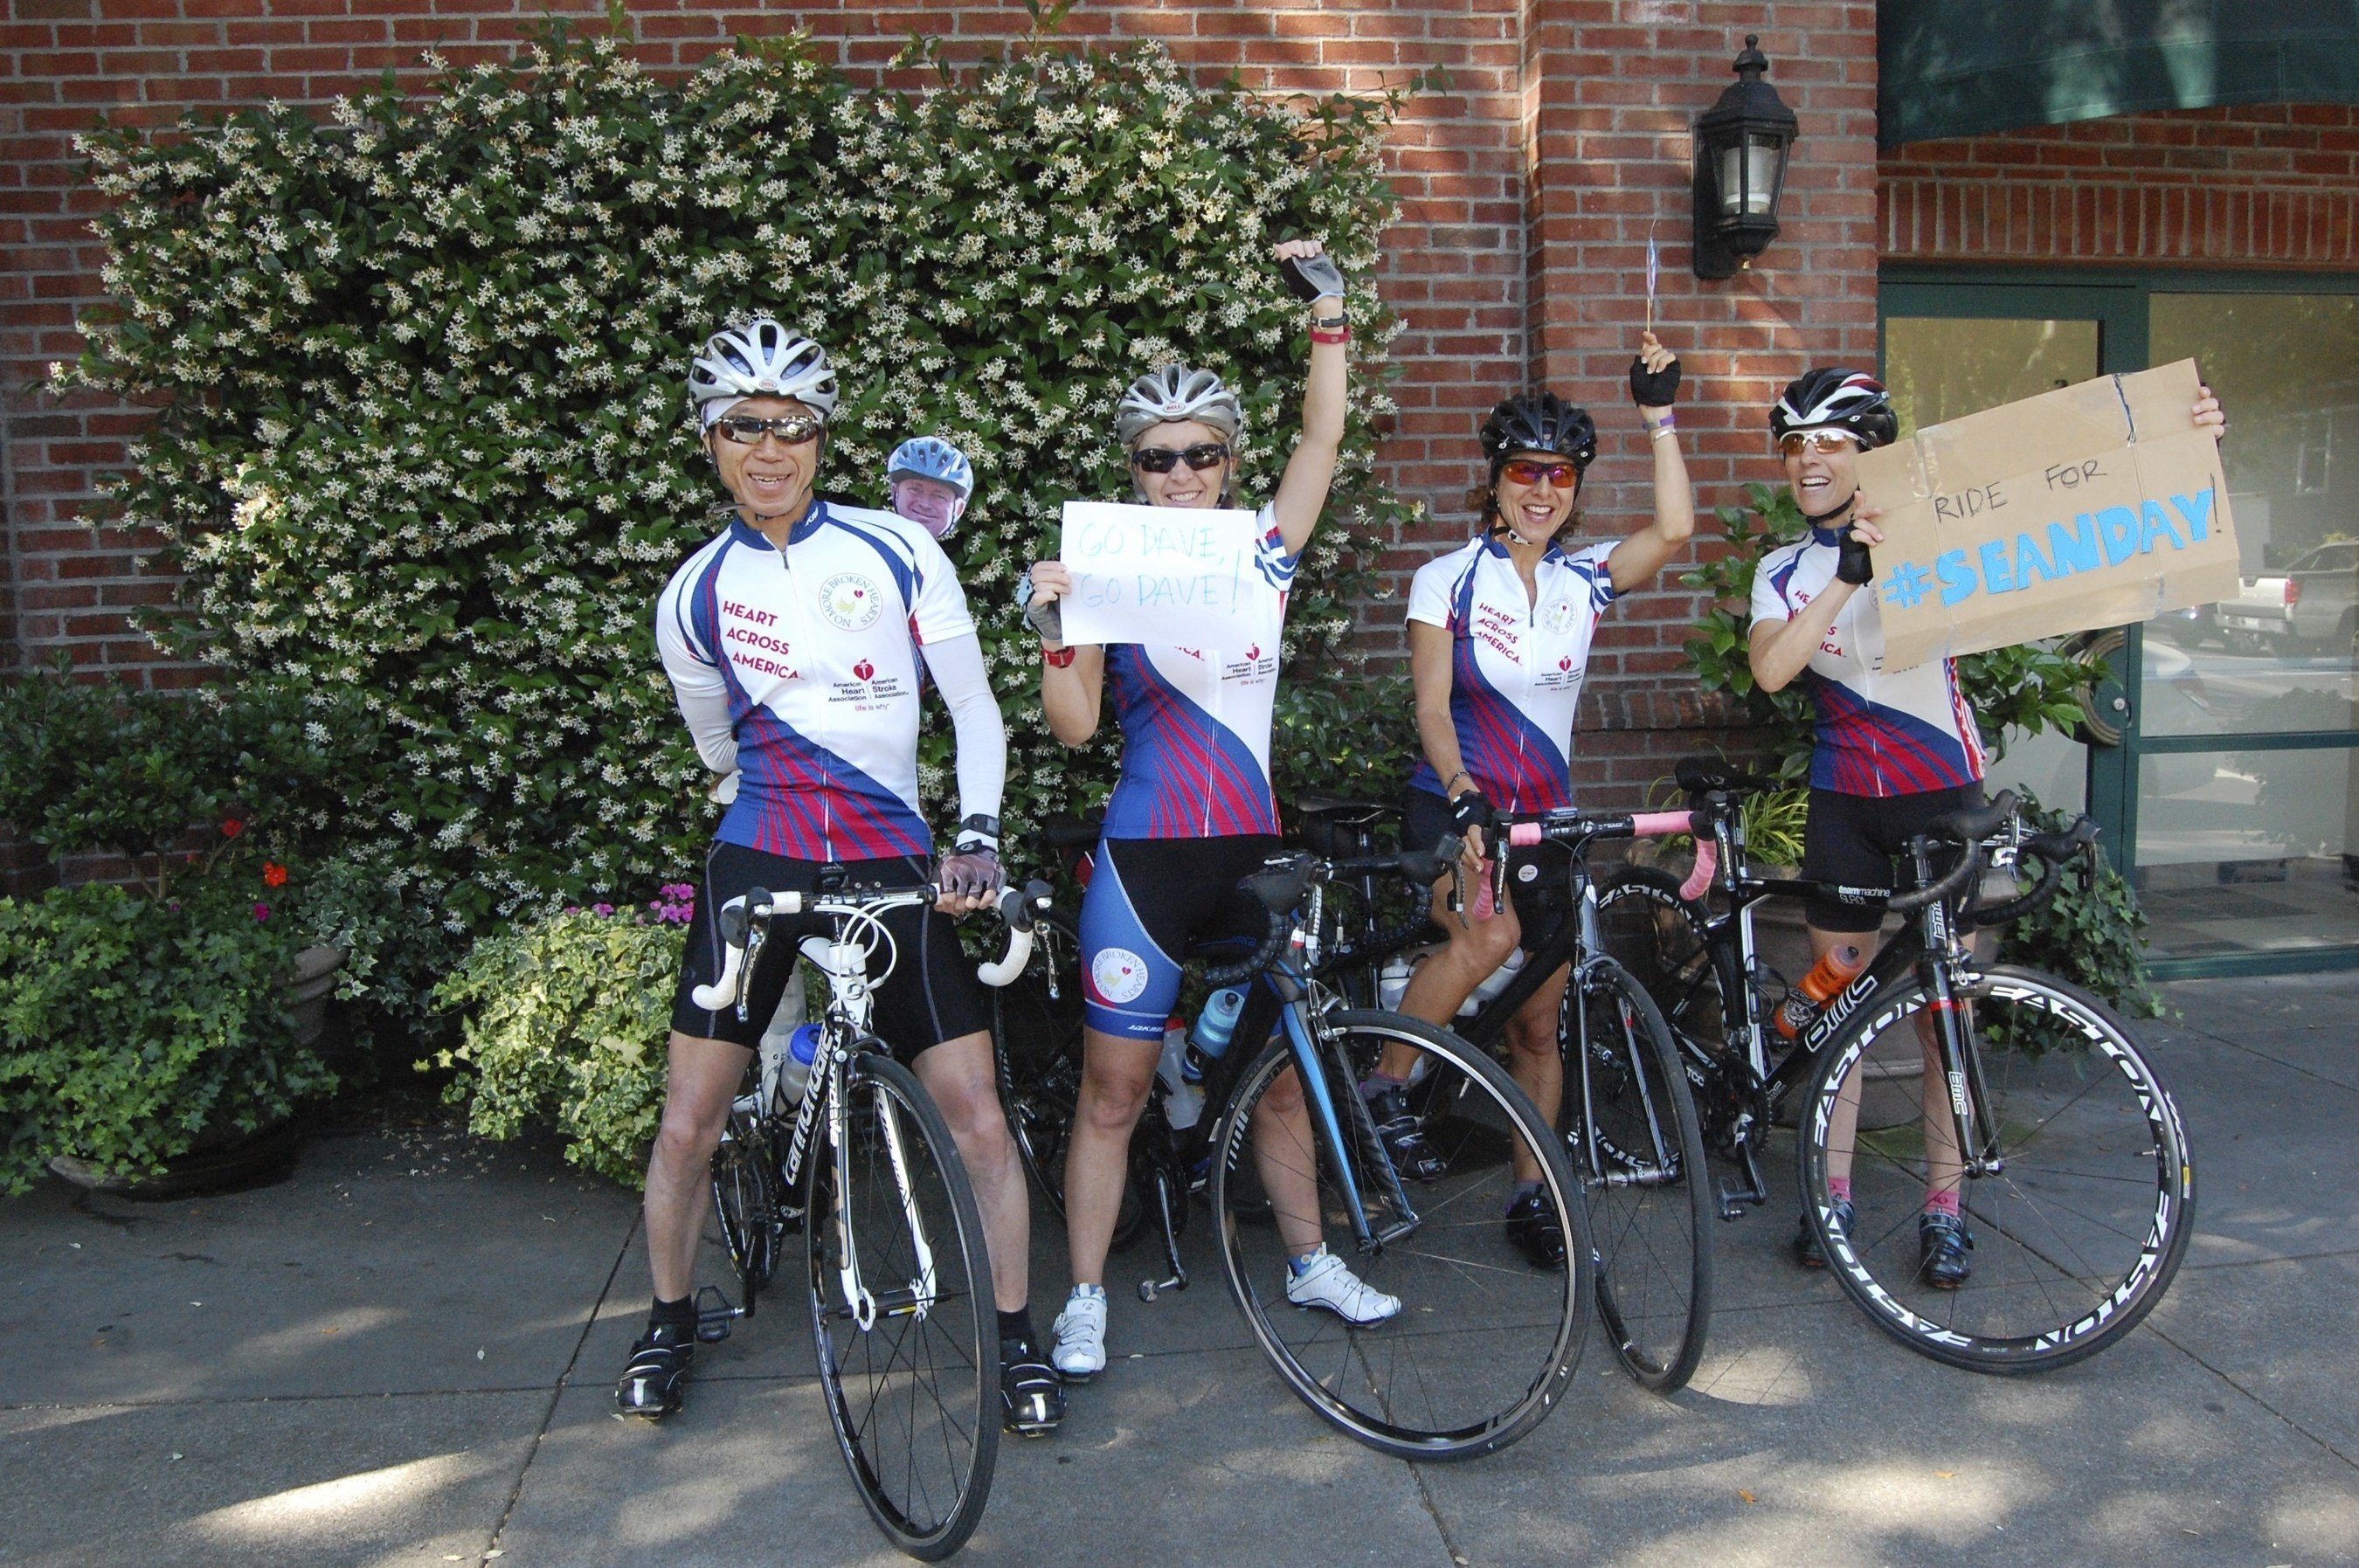 Cyclists riding for #SeandaySunday show their support for stroke awareness and Maloney's message of hope